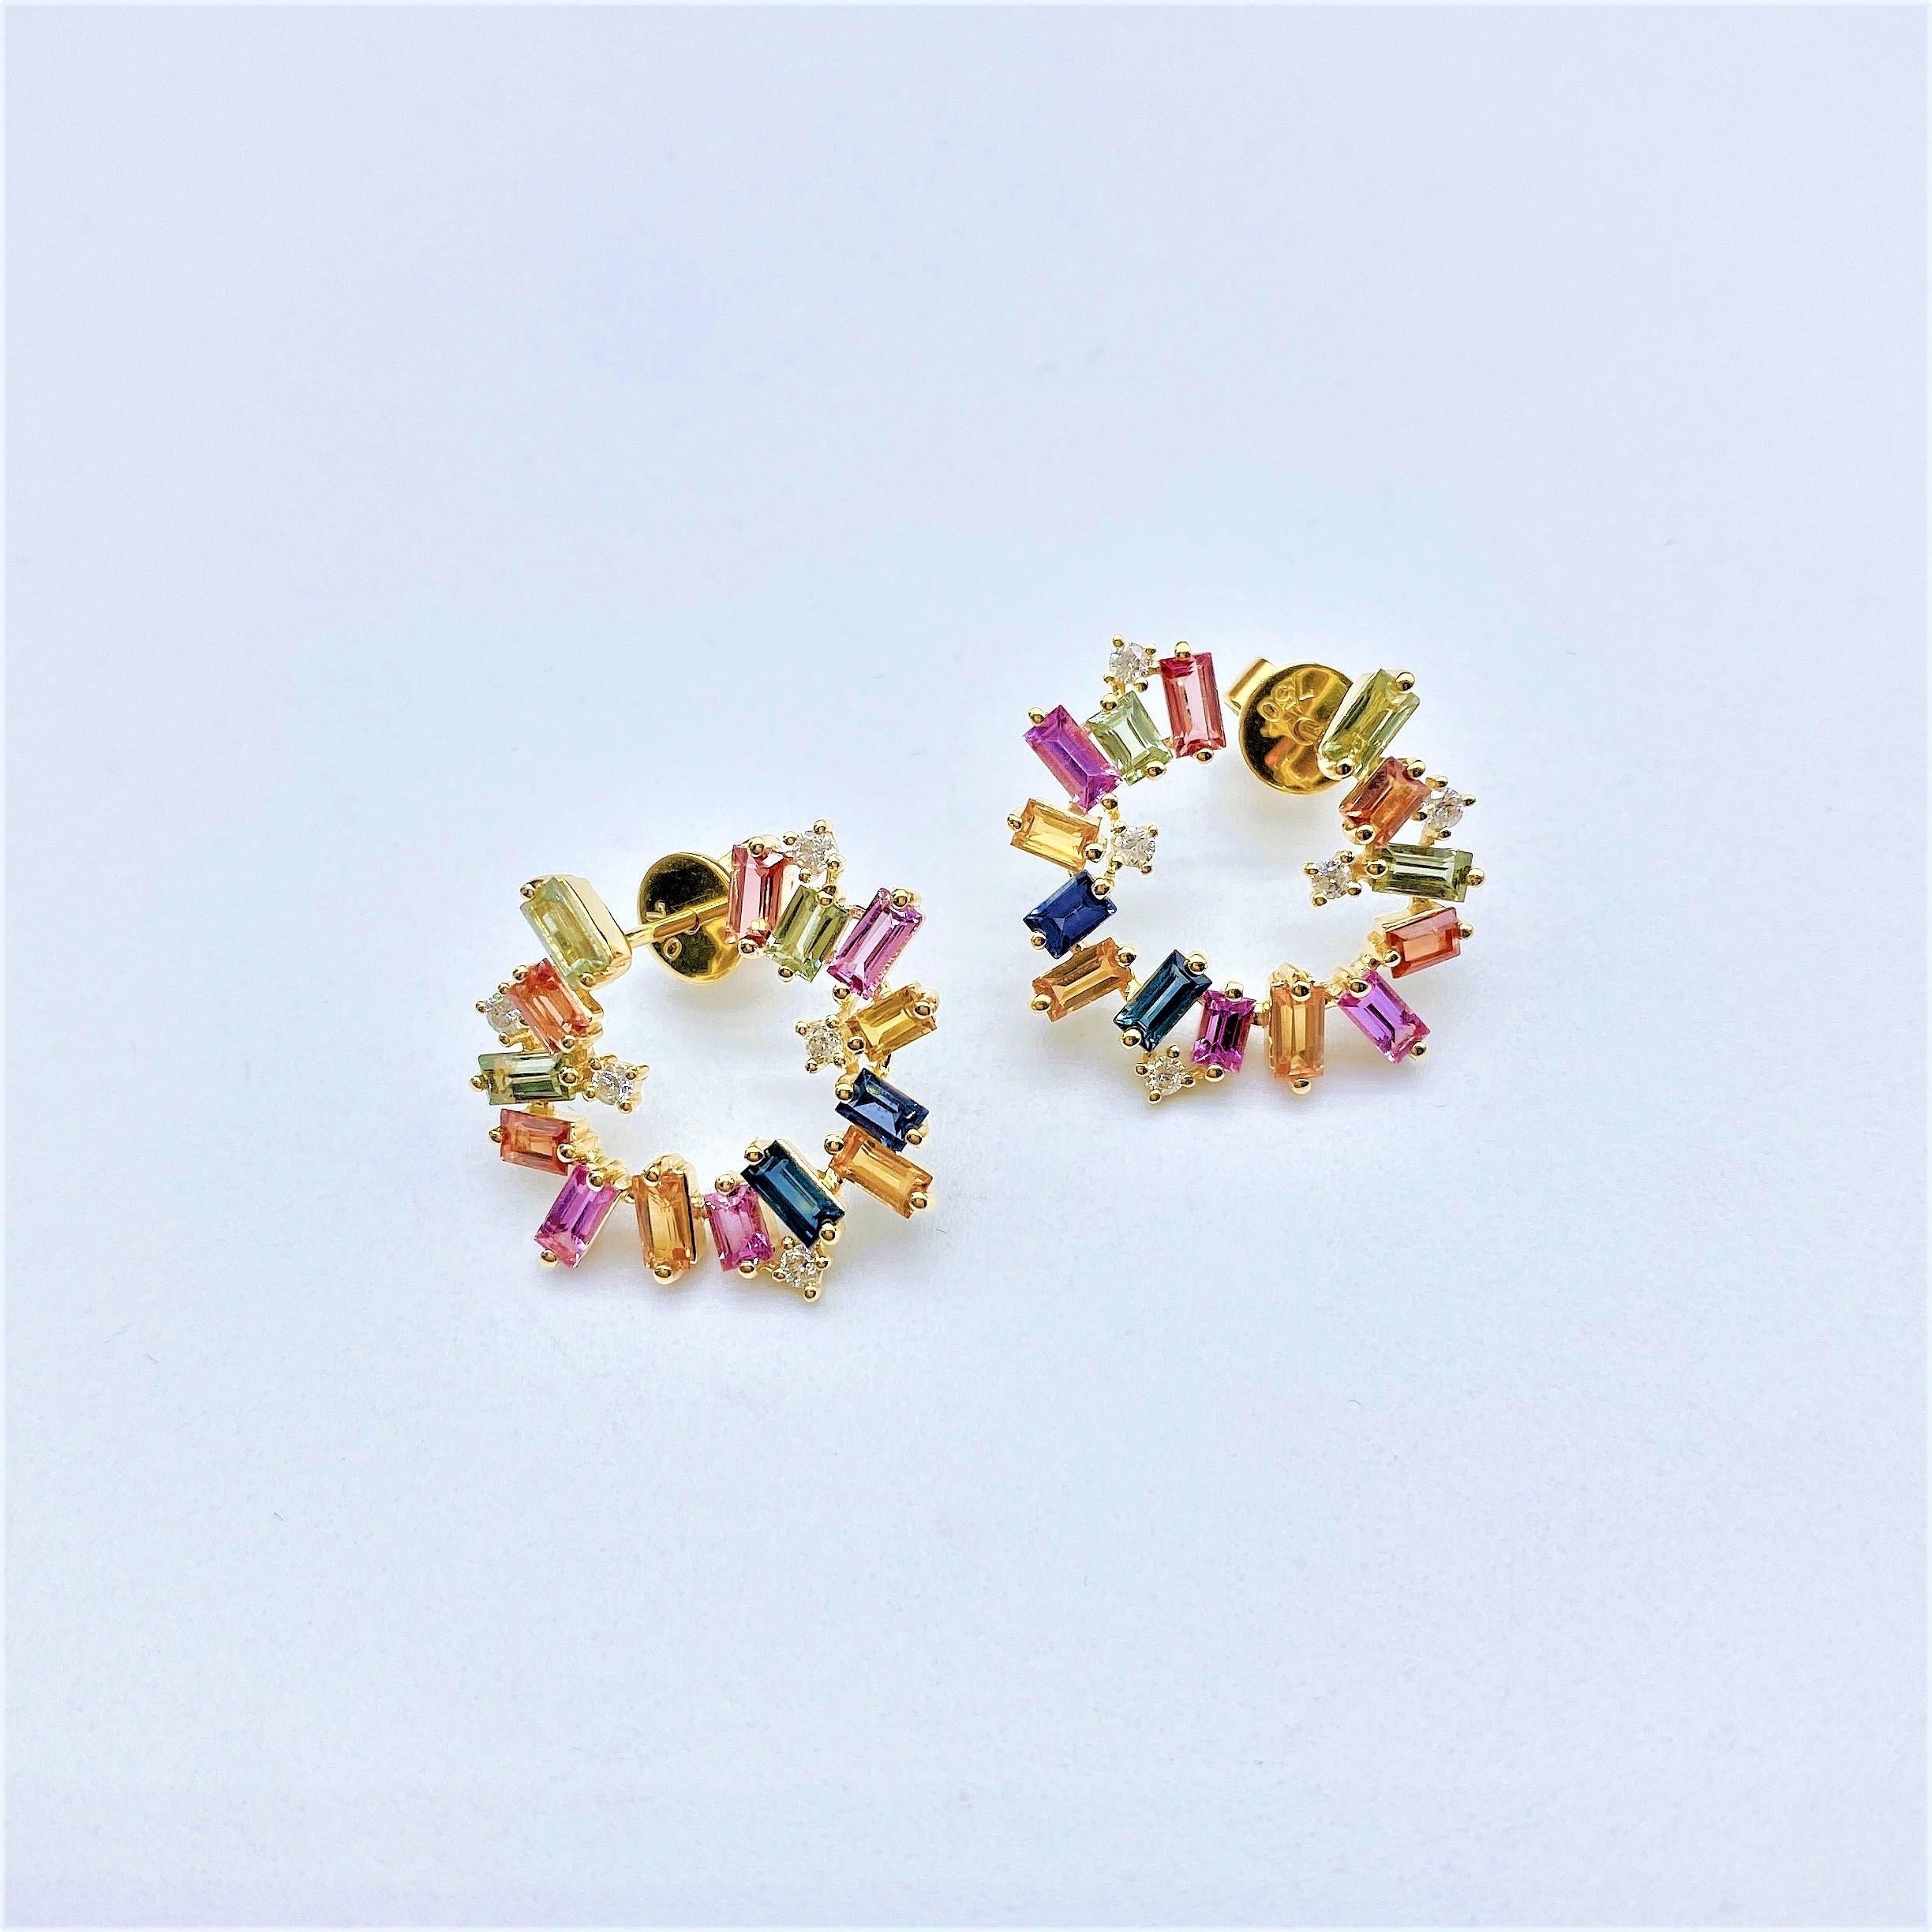 The Following Item we are offering is a Rare Important Radiant 18KT Gold Pair of Large Rare Gorgeous Multi Rainbow Sapphire and Diamond Twist Earrings. Earrings are comprised of Beautiful Glittering Rare Colorful Sapphires and Glittering Diamonds